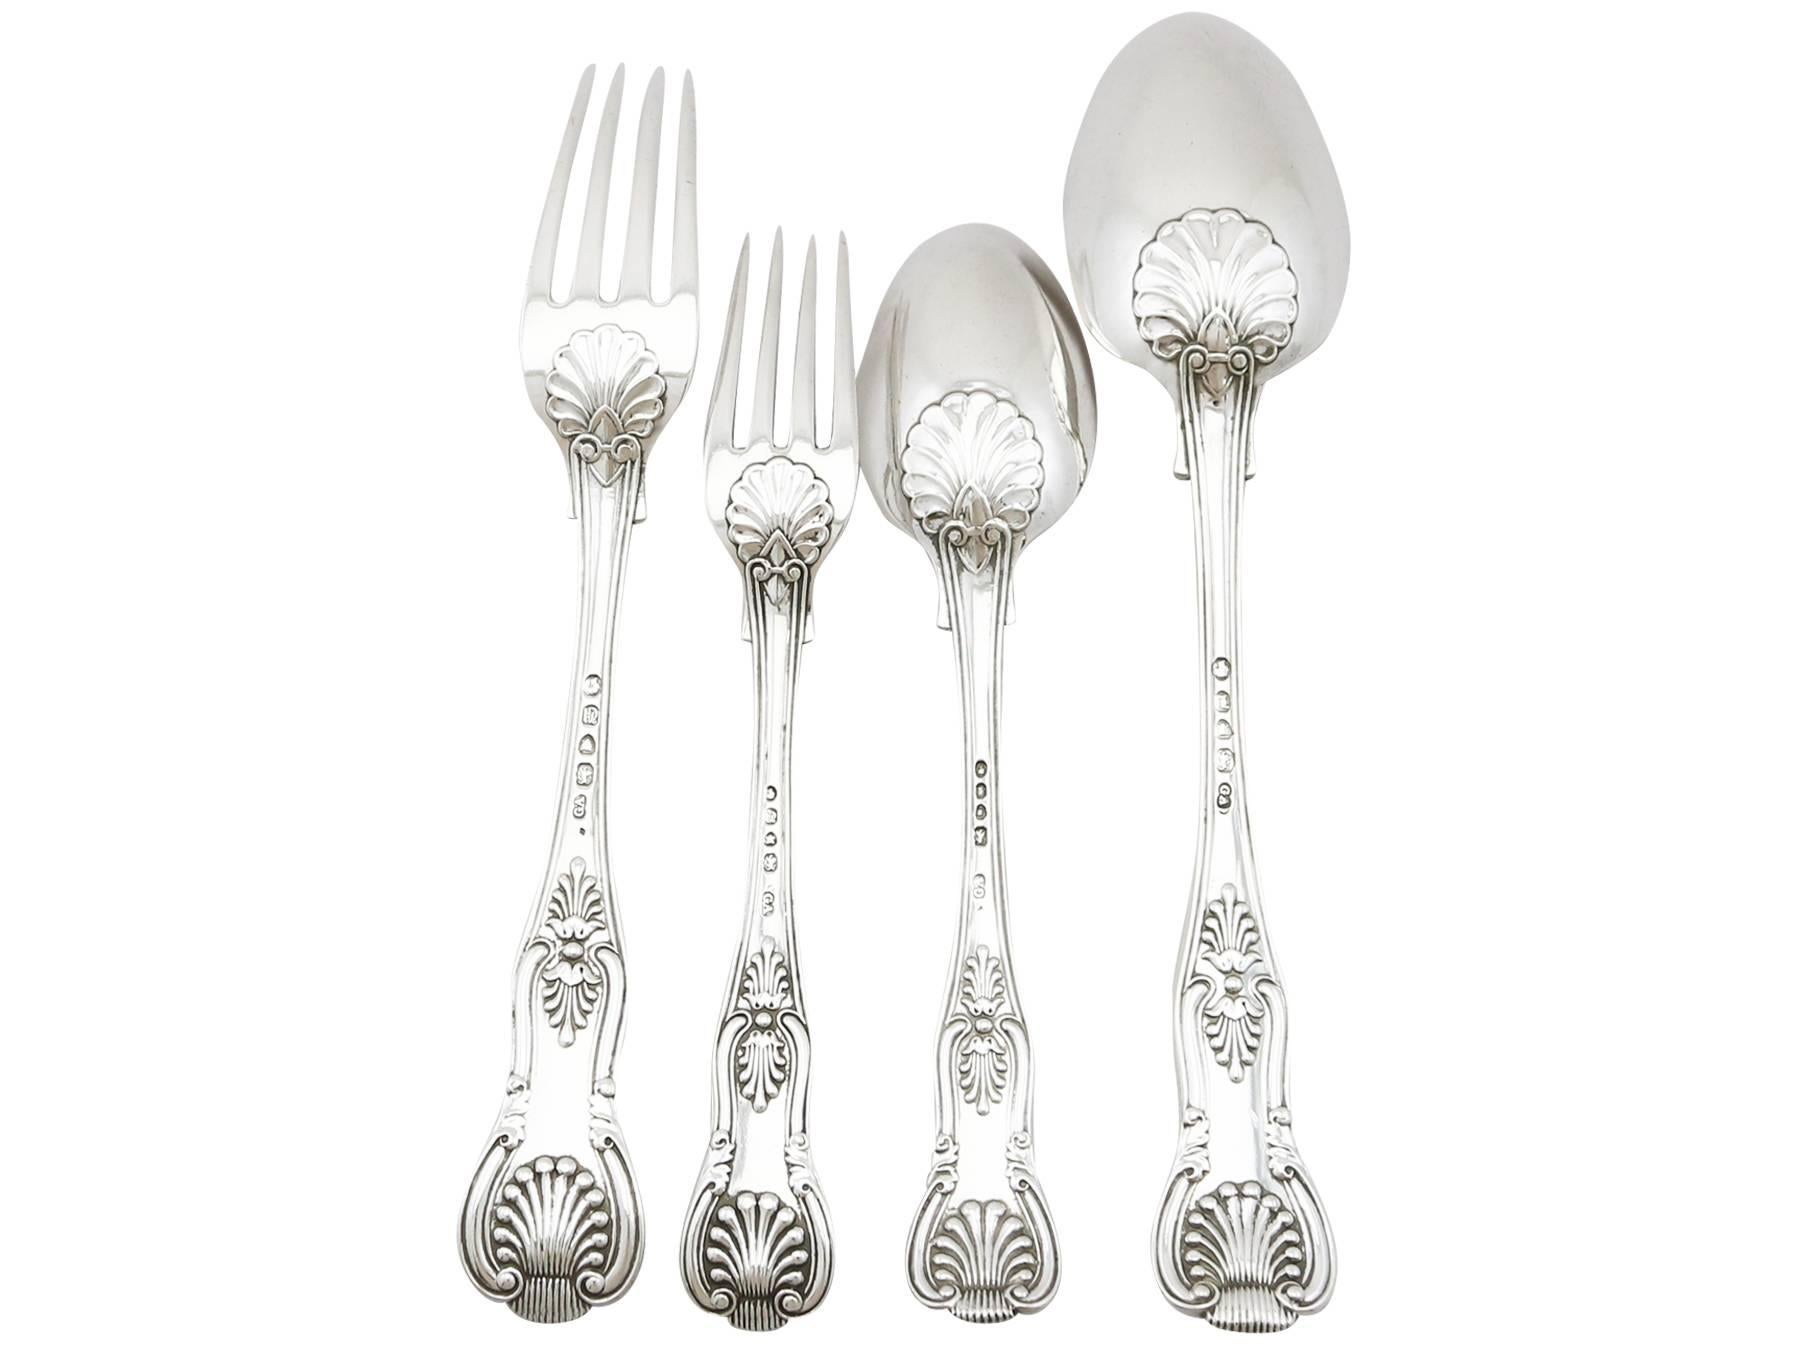 An exceptional, fine and impressive antique Victorian English straight sterling silver King's pattern flatware service for 12 persons; an addition to our canteen of cutlery collection.

The pieces of this fine, antique Victorian sterling silver